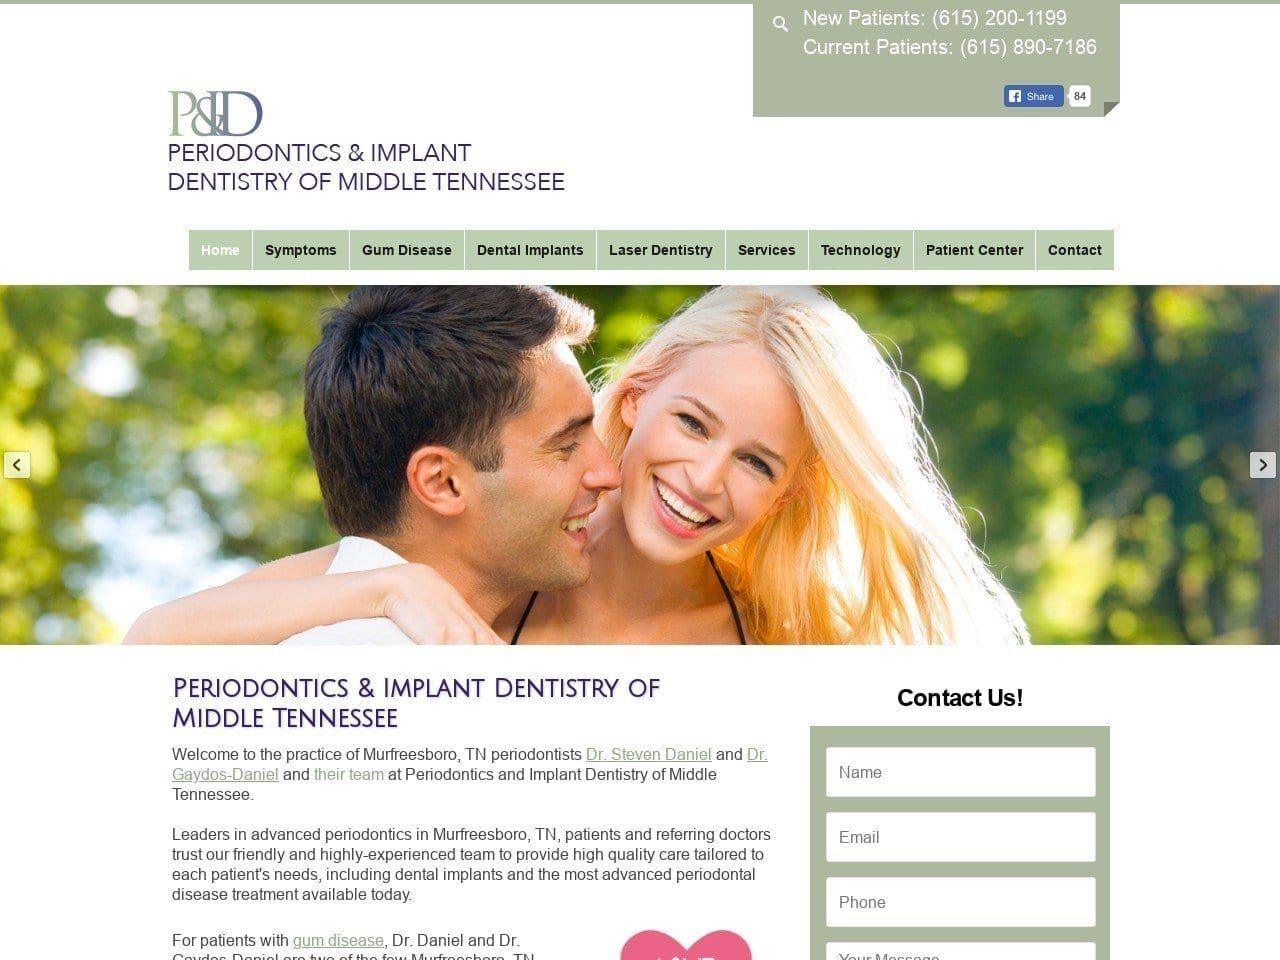 Periodontics & Implant Dentistry Of Middle Tenness Website Screenshot from middletennesseeperio.com